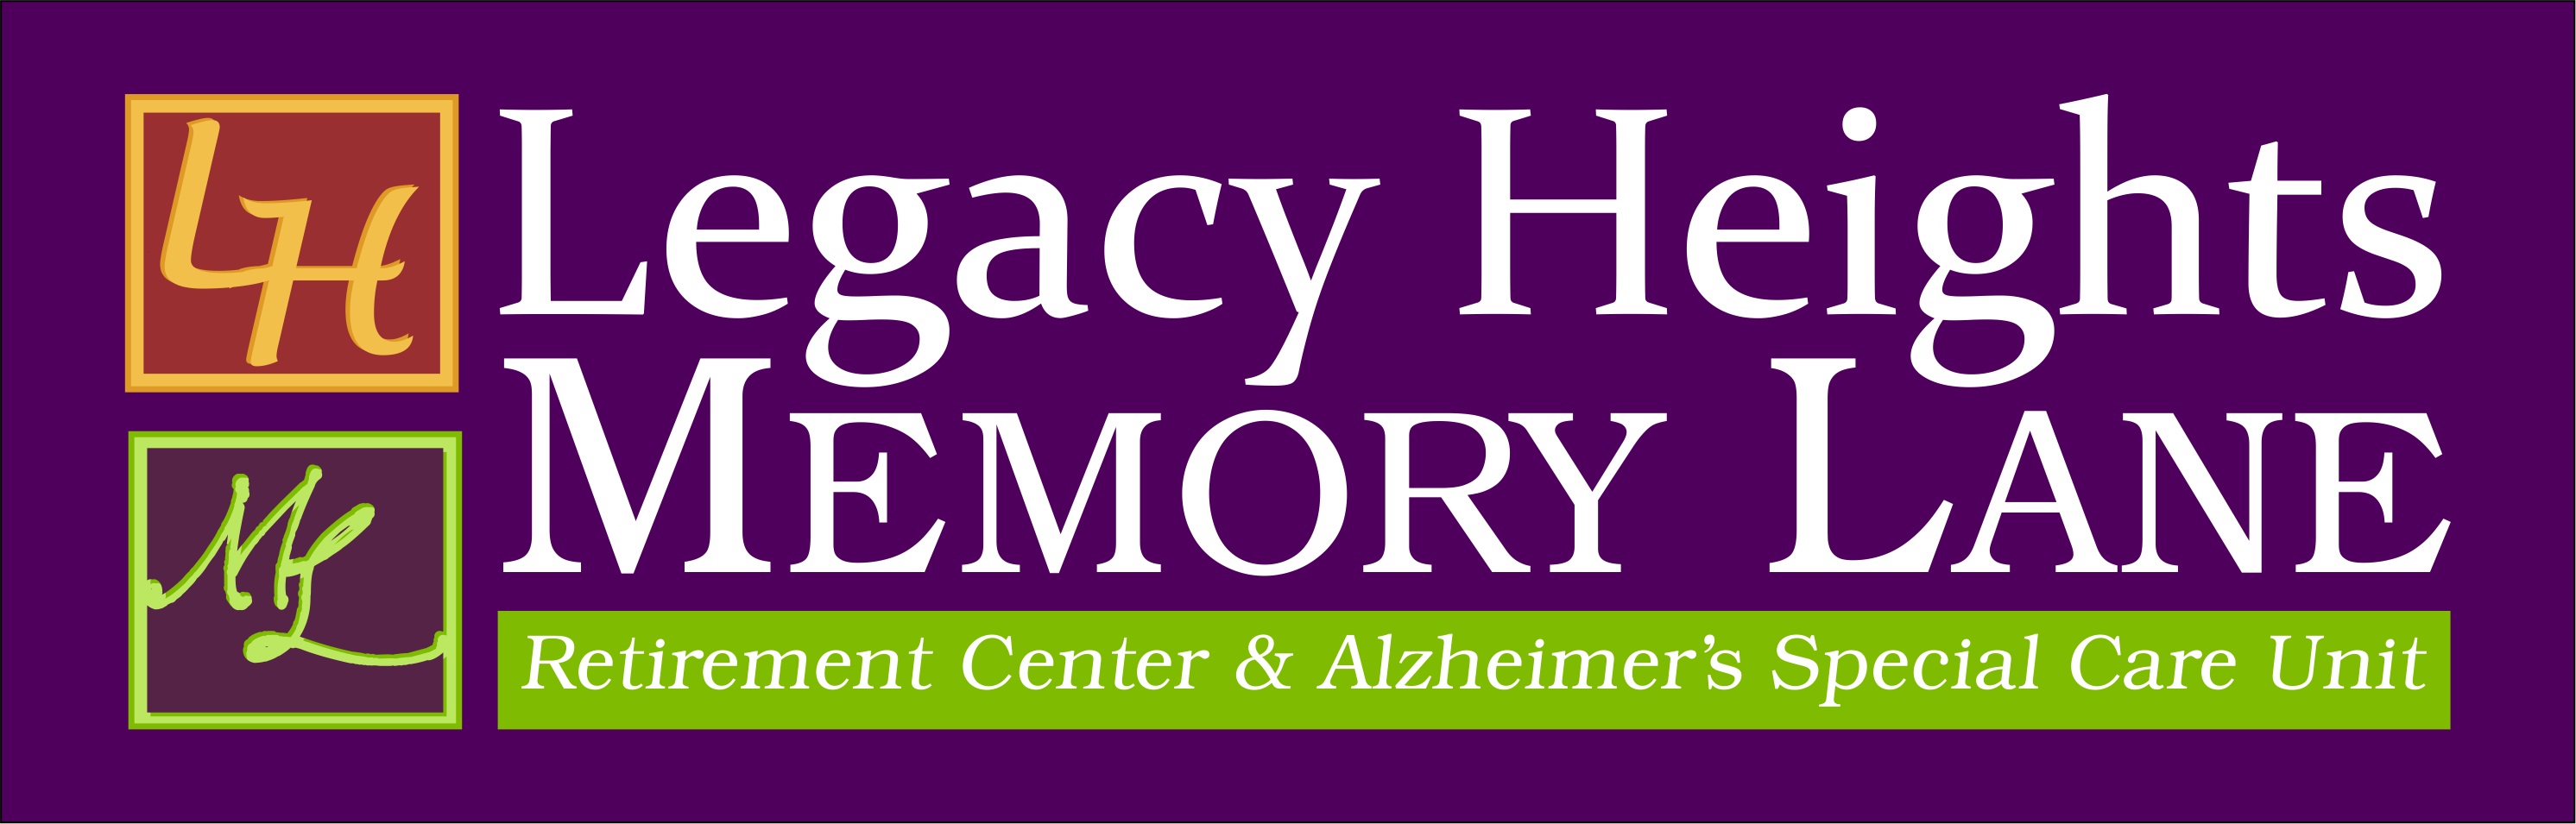 Legacy Heights and Memory Lane (Presenting)